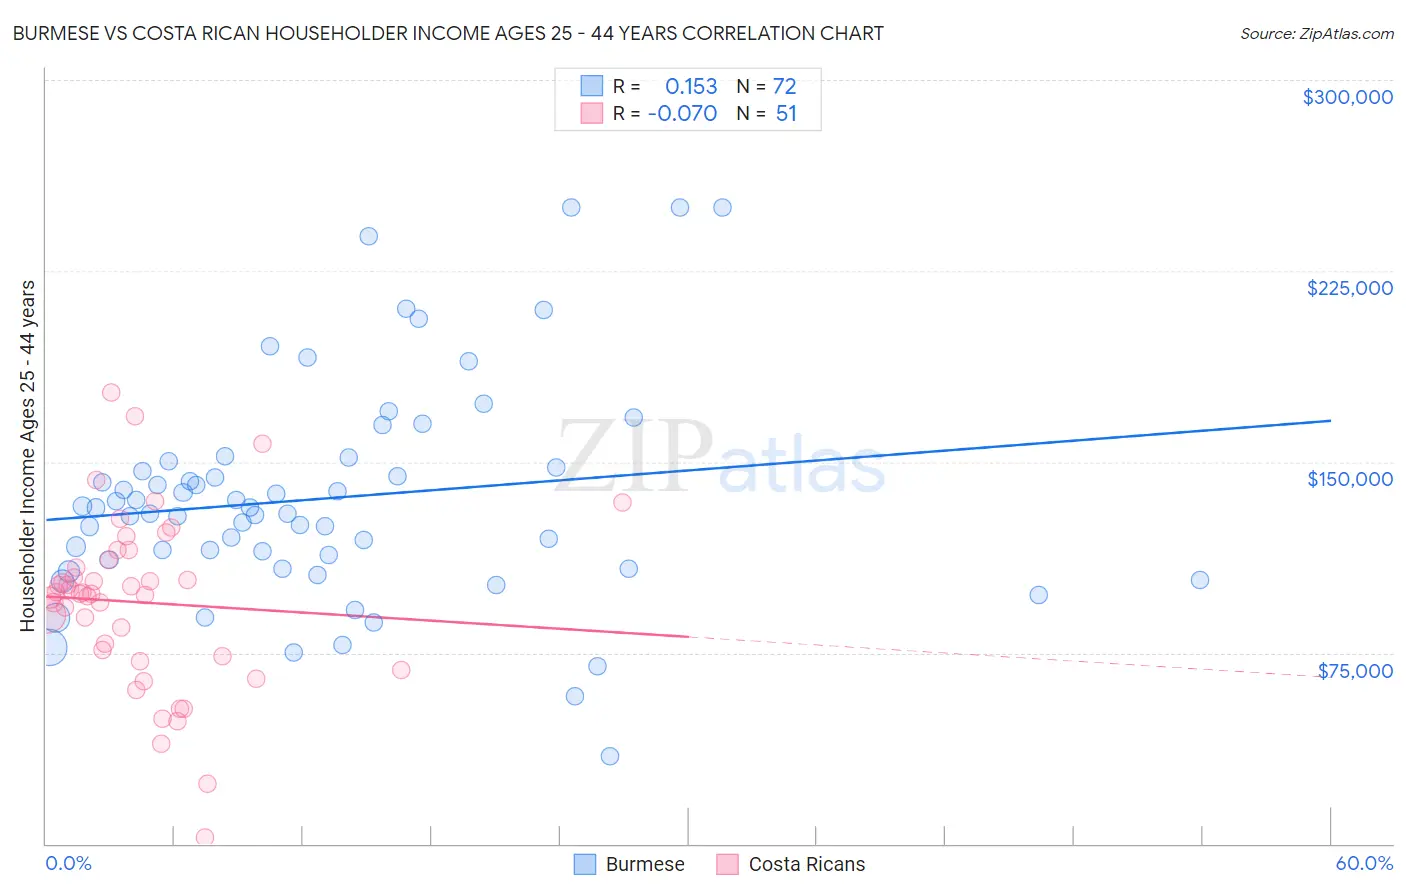 Burmese vs Costa Rican Householder Income Ages 25 - 44 years